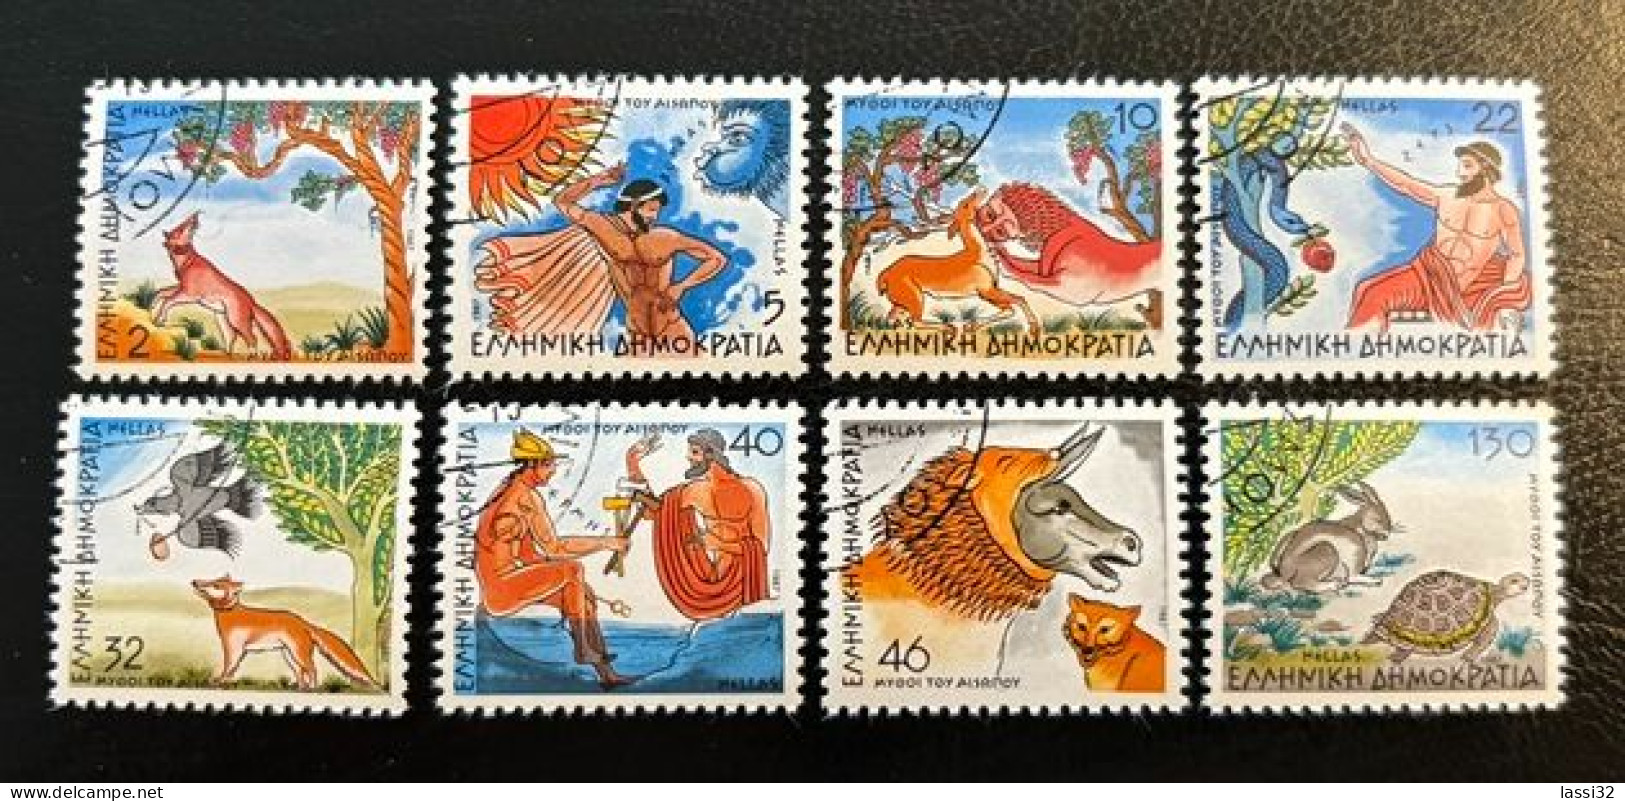 GREECE,1987, AESOP'S FABLES, USED - Used Stamps